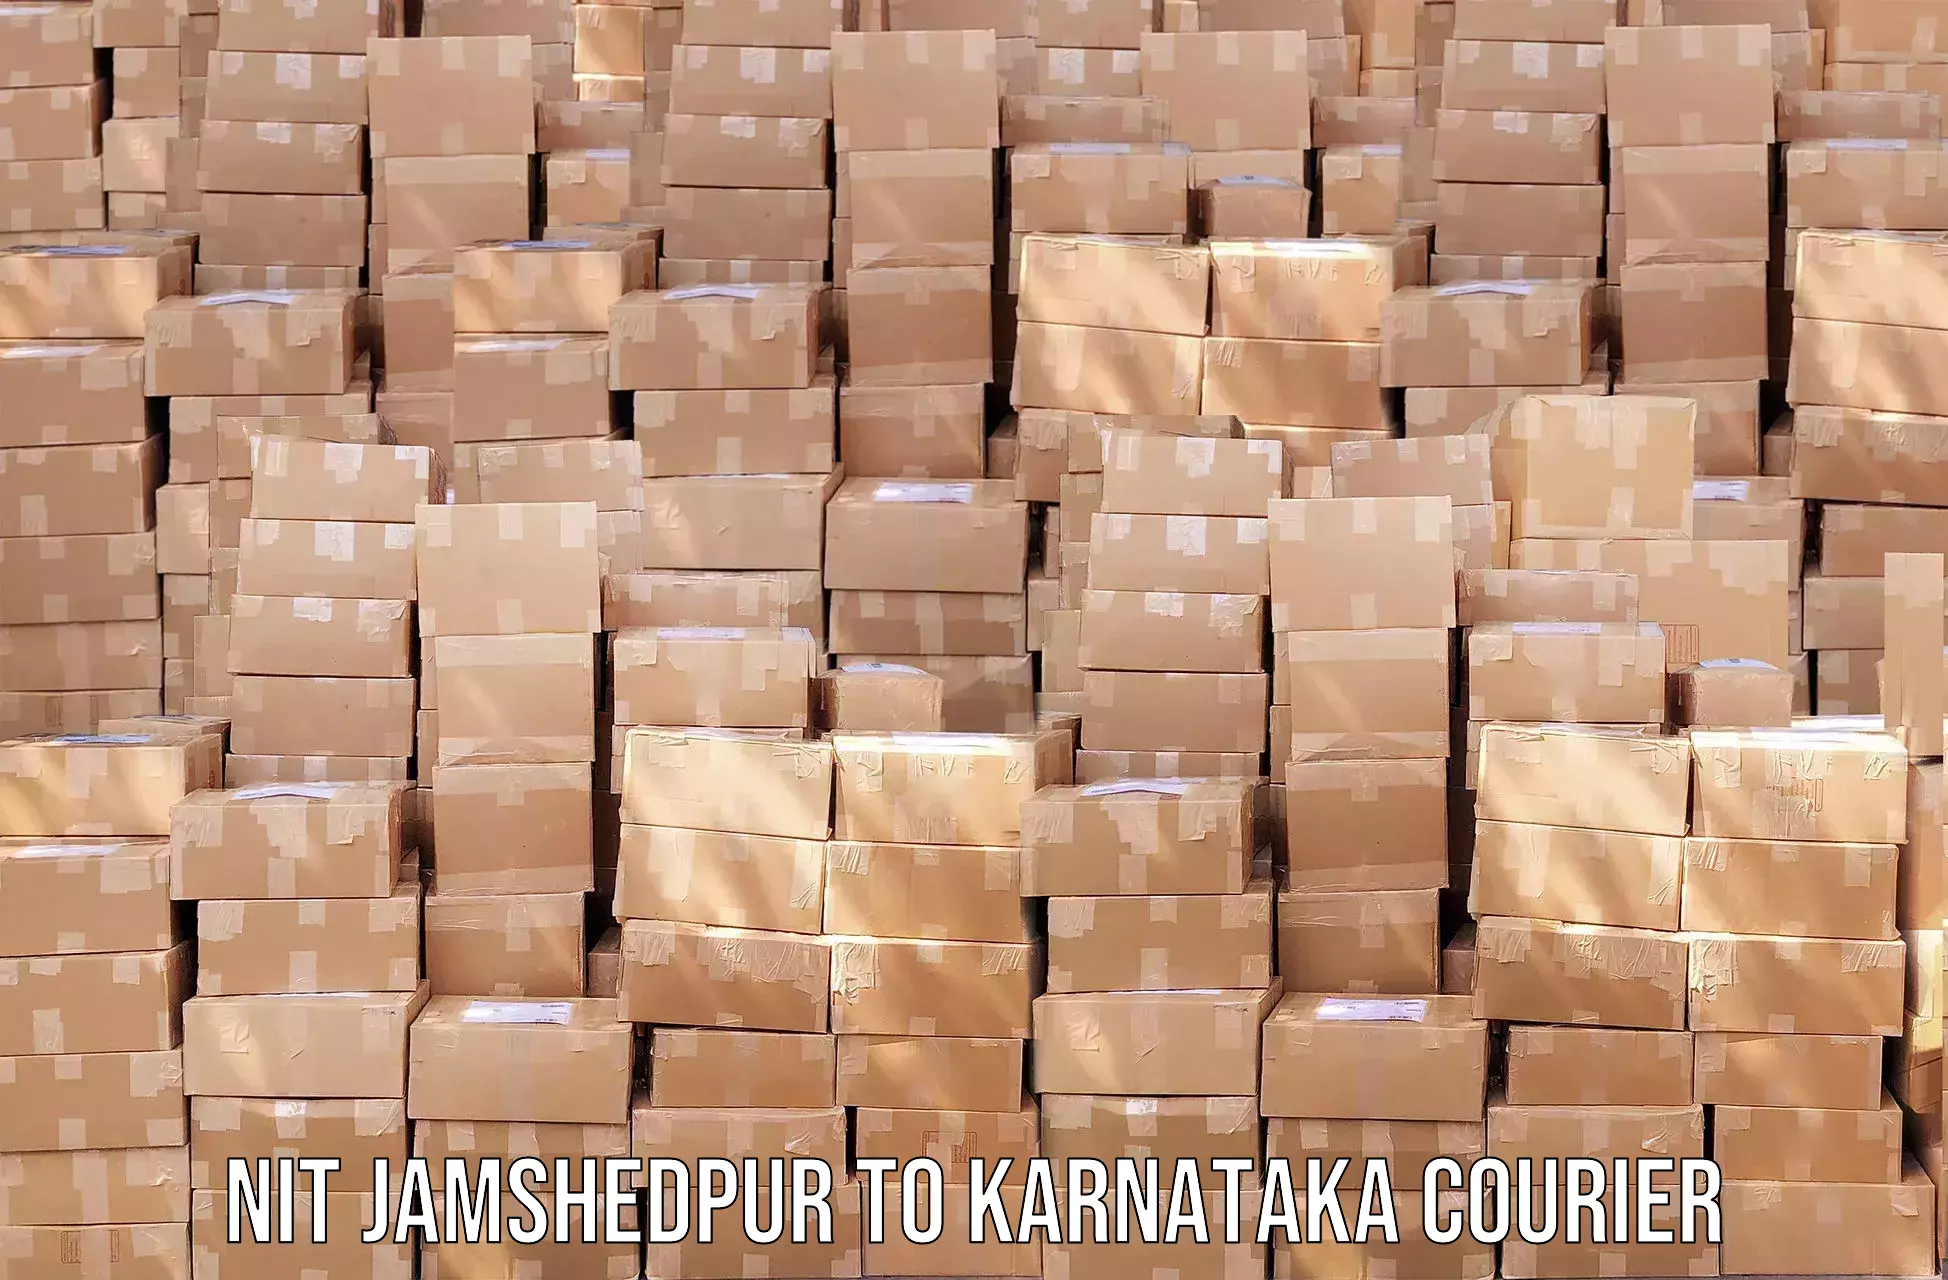 Corporate courier solutions NIT Jamshedpur to Bangarapet